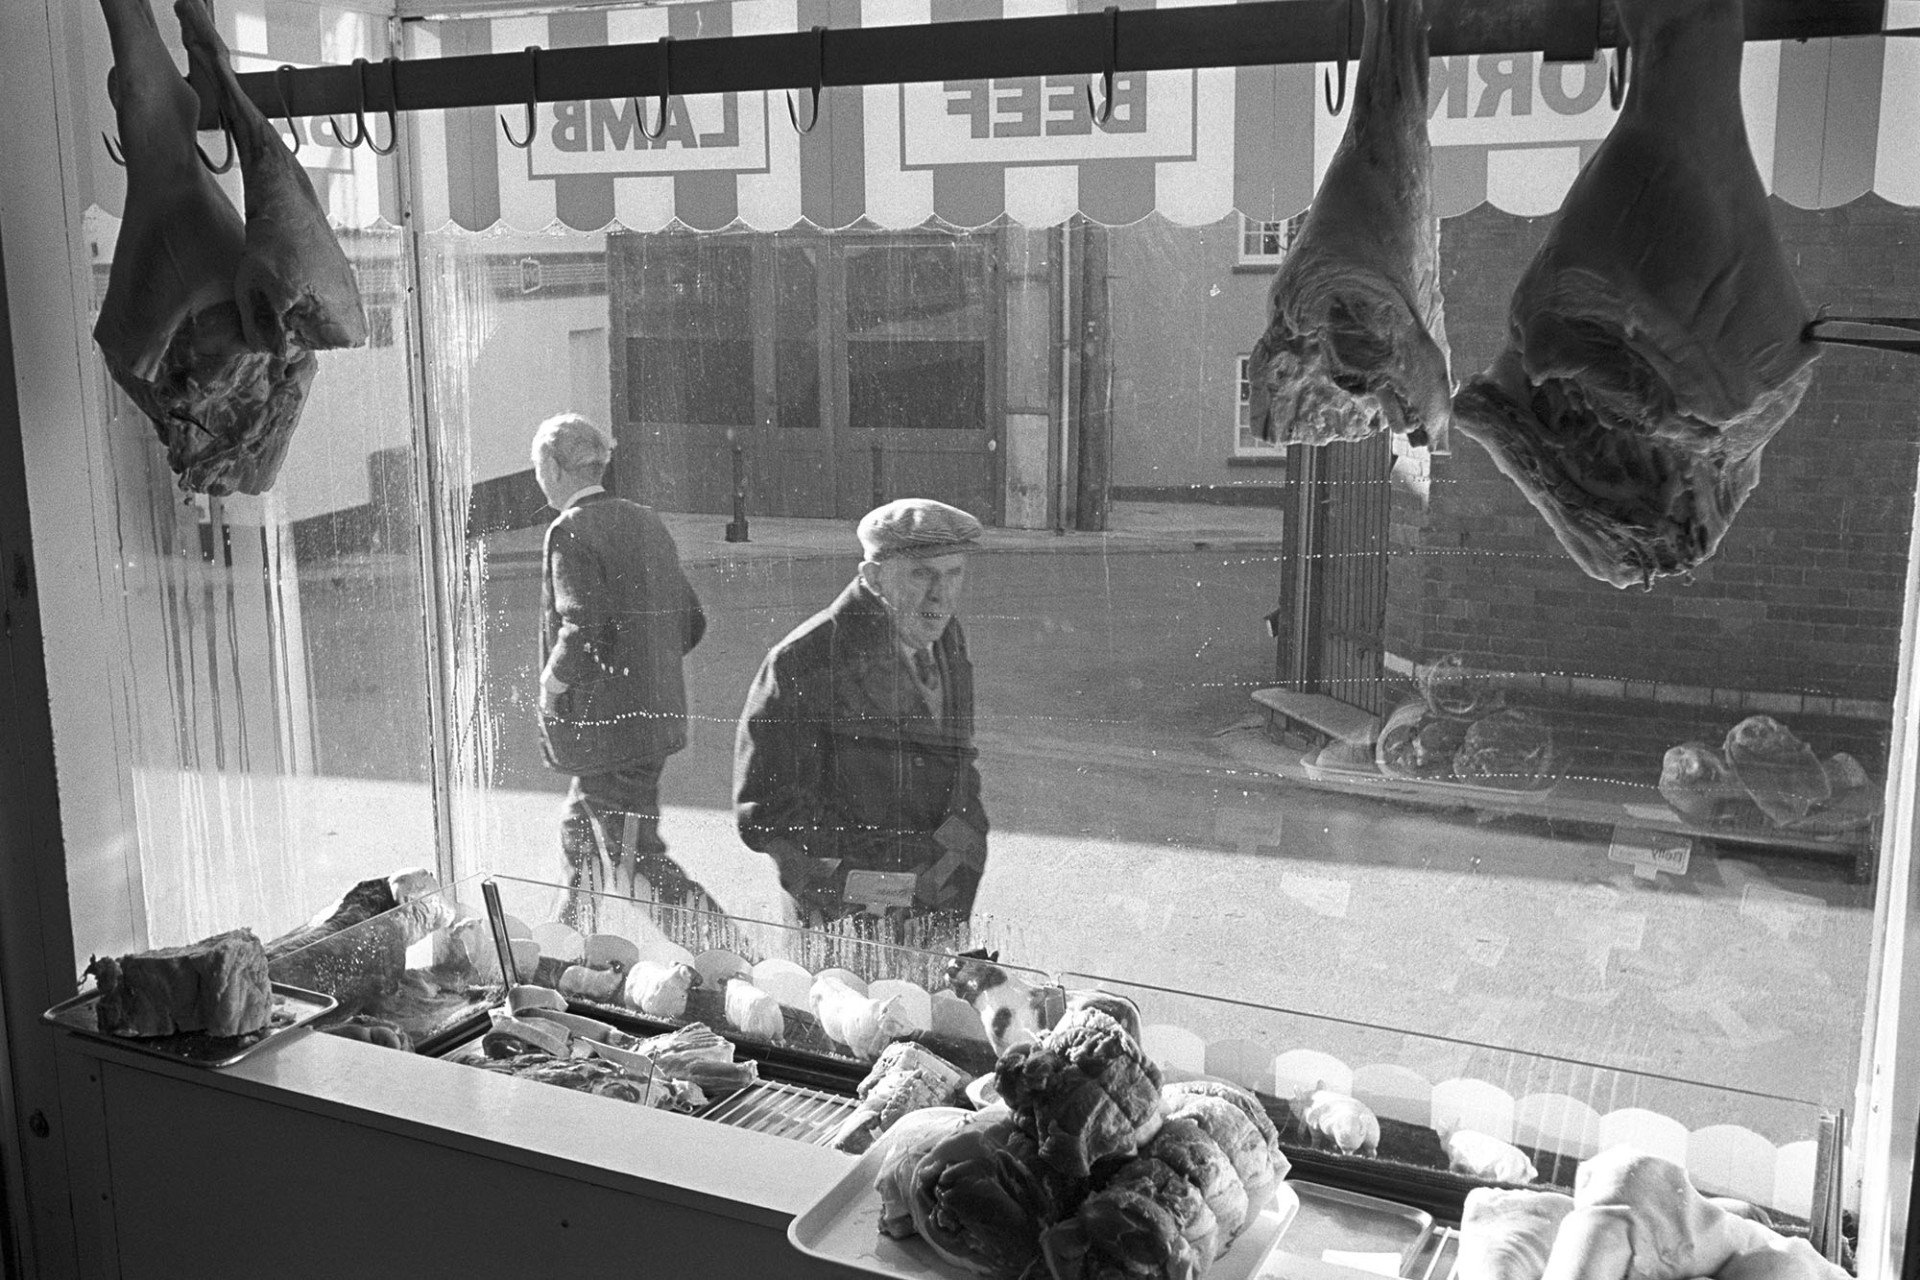 Window of butchers shop with passers by, seen from inside. 
[Cuts of meat hanging up in Cann's Butcher's shop window on South Molton Street, Chulmleigh. The image is taken from inside the butcher's shop and two men can be seen walking past outside.]